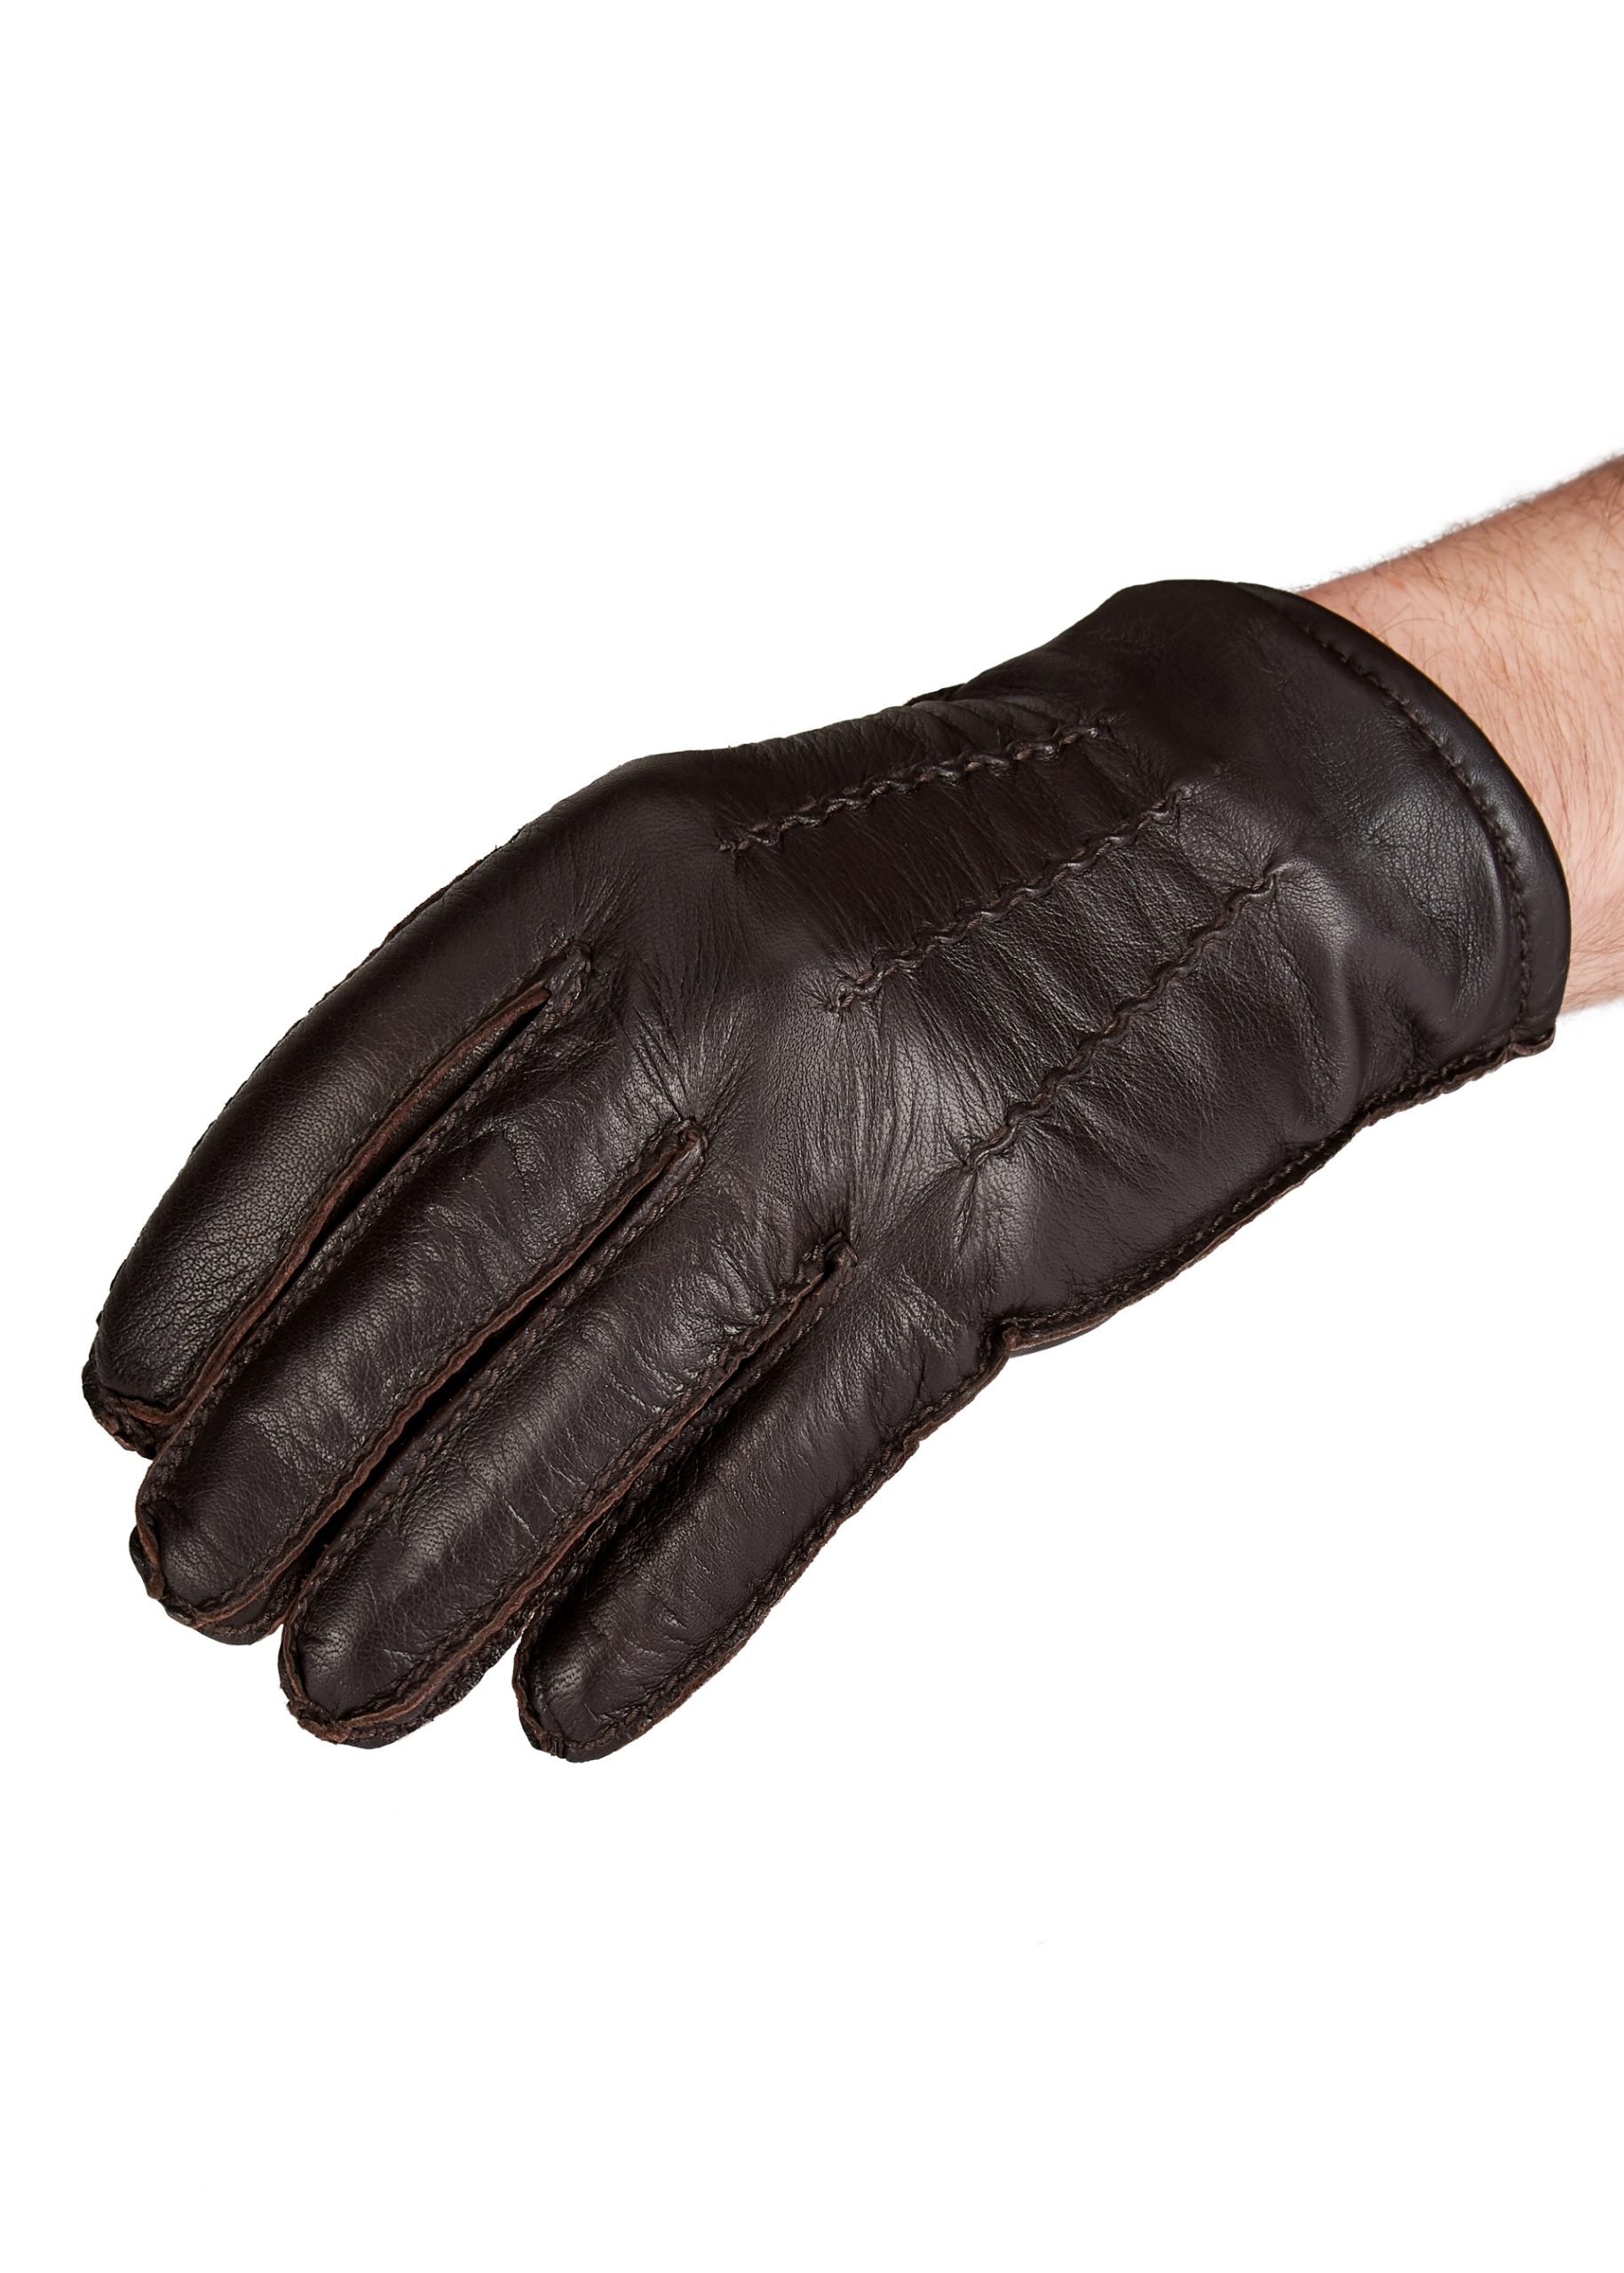 Men’s beautiful genuine leather brown gloves